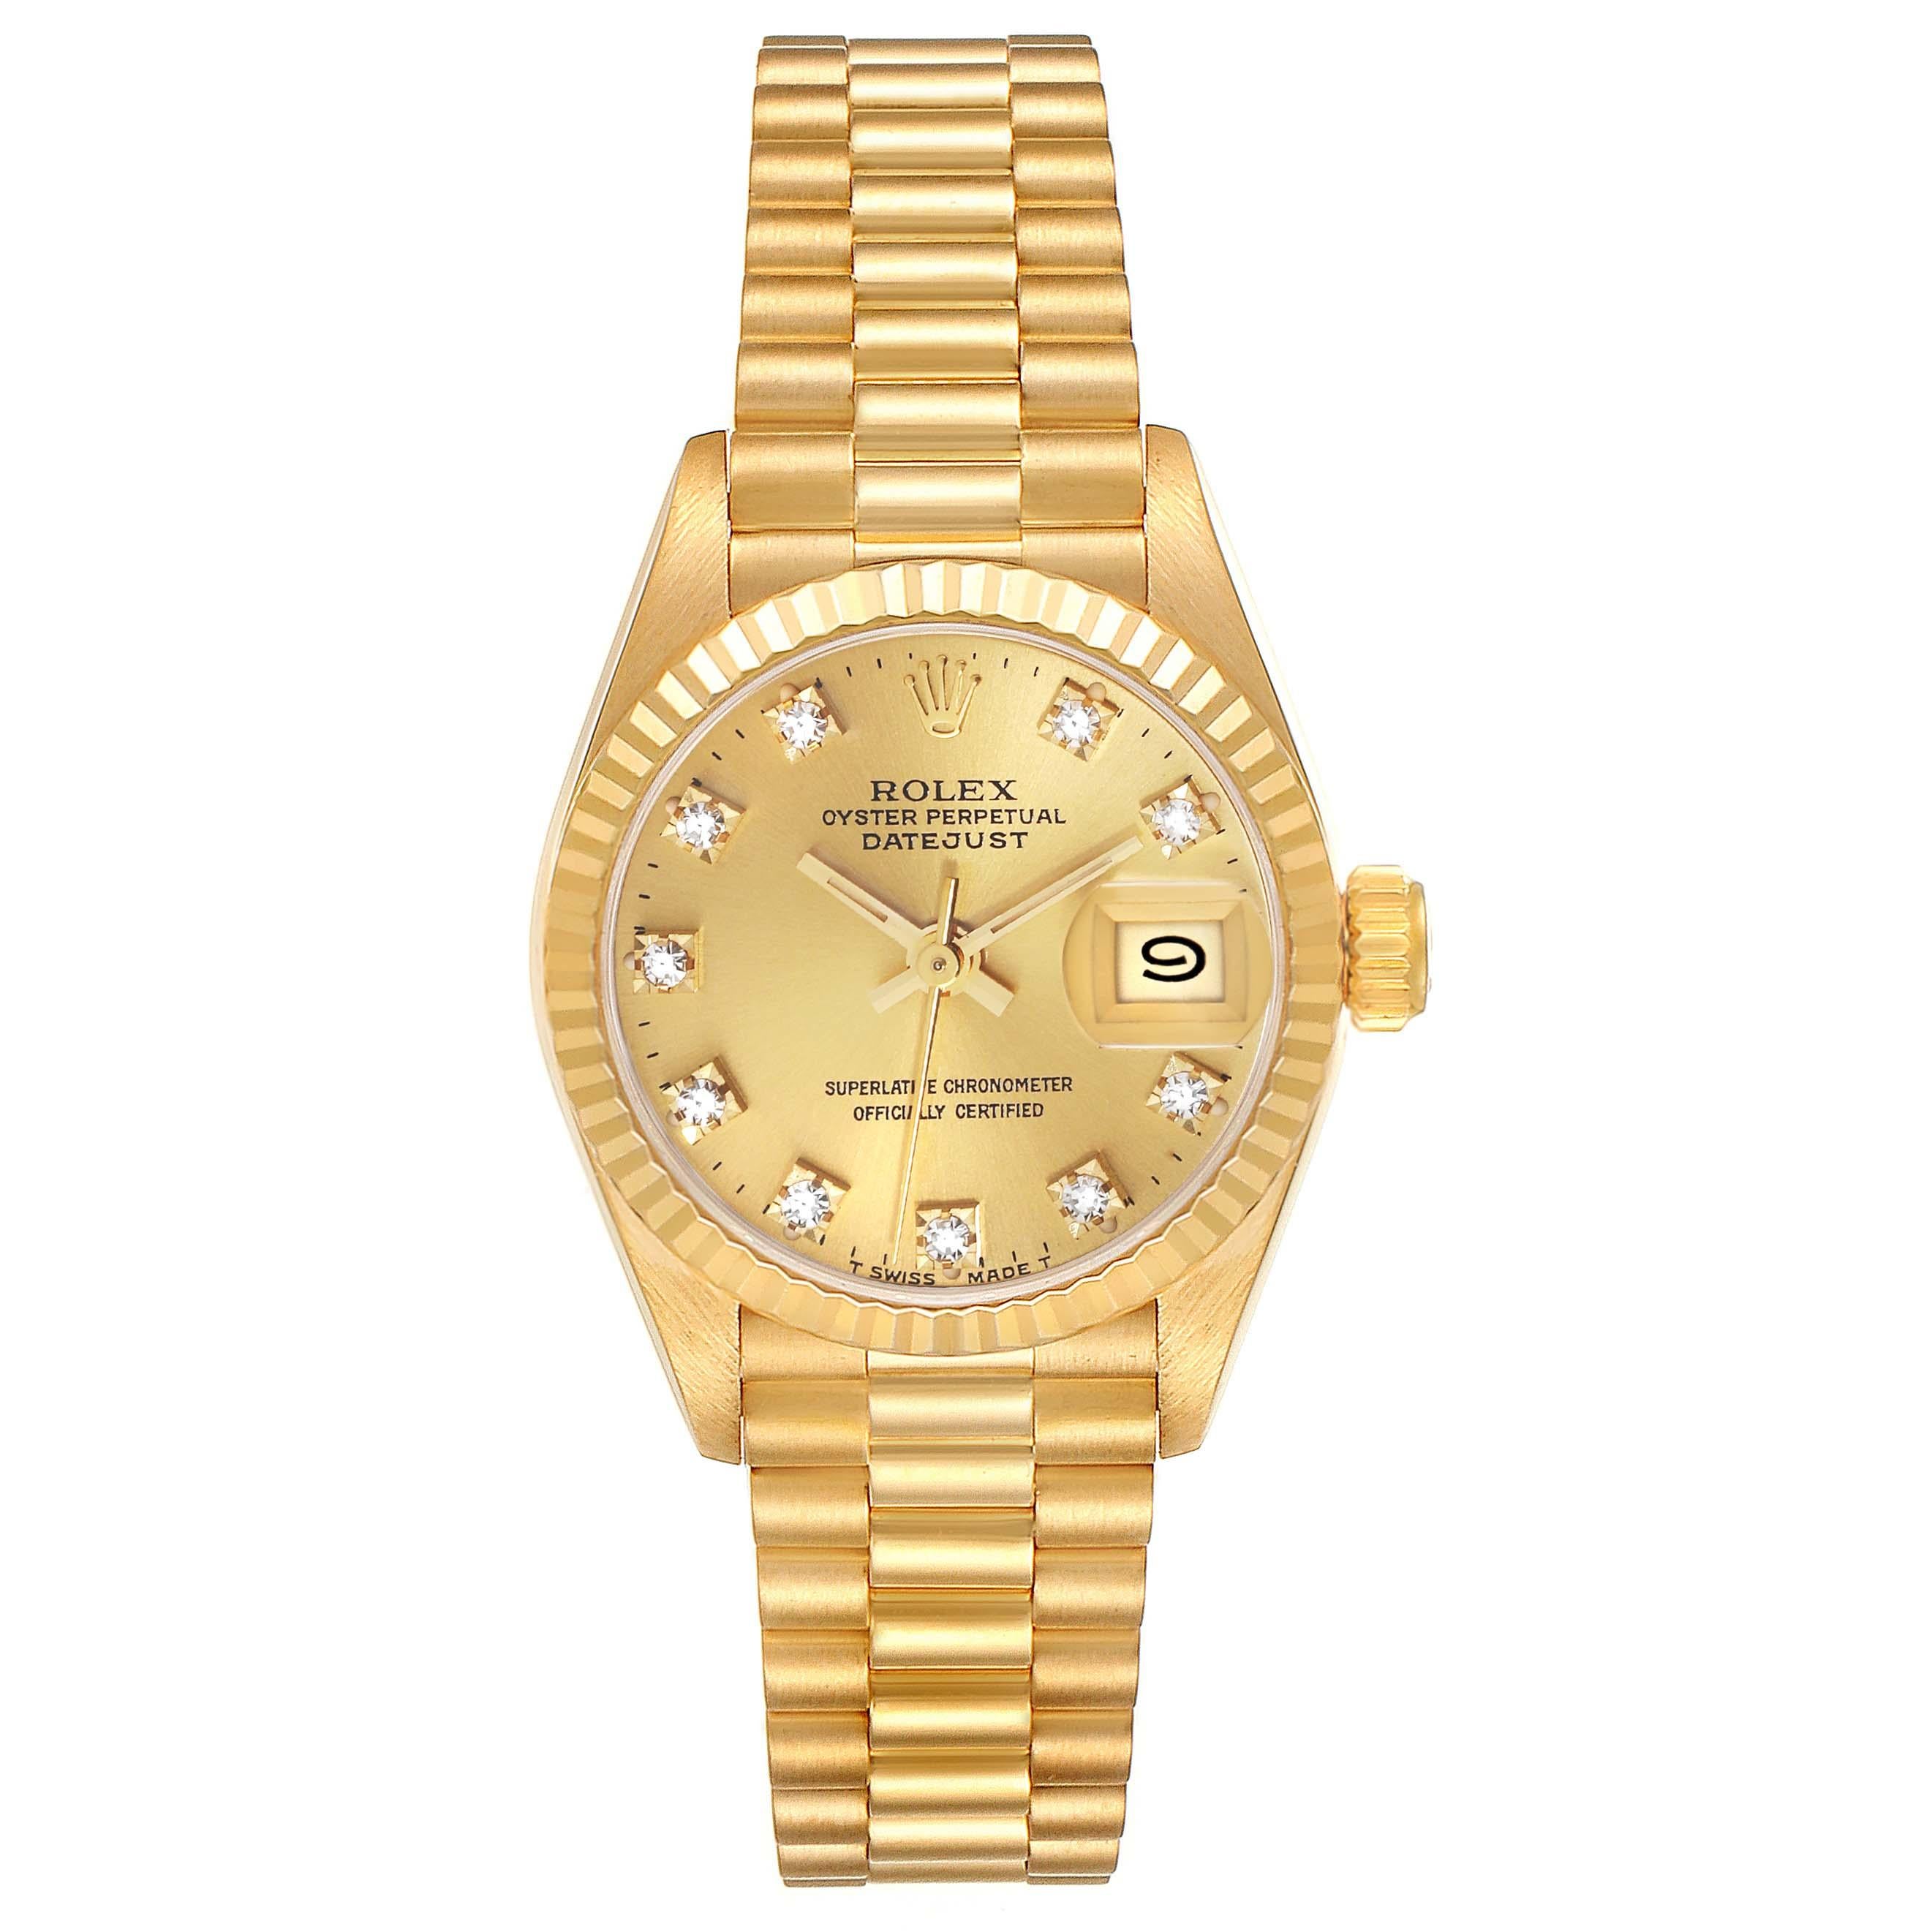 Rolex Datejust President Yellow Gold Champagne Diamond Dial Ladies Watch 69178. Officially certified chronometer automatic self-winding movement. 18k yellow gold oyster case 26.0 mm in diameter. Rolex logo on the crown. 18k yellow gold fluted bezel.